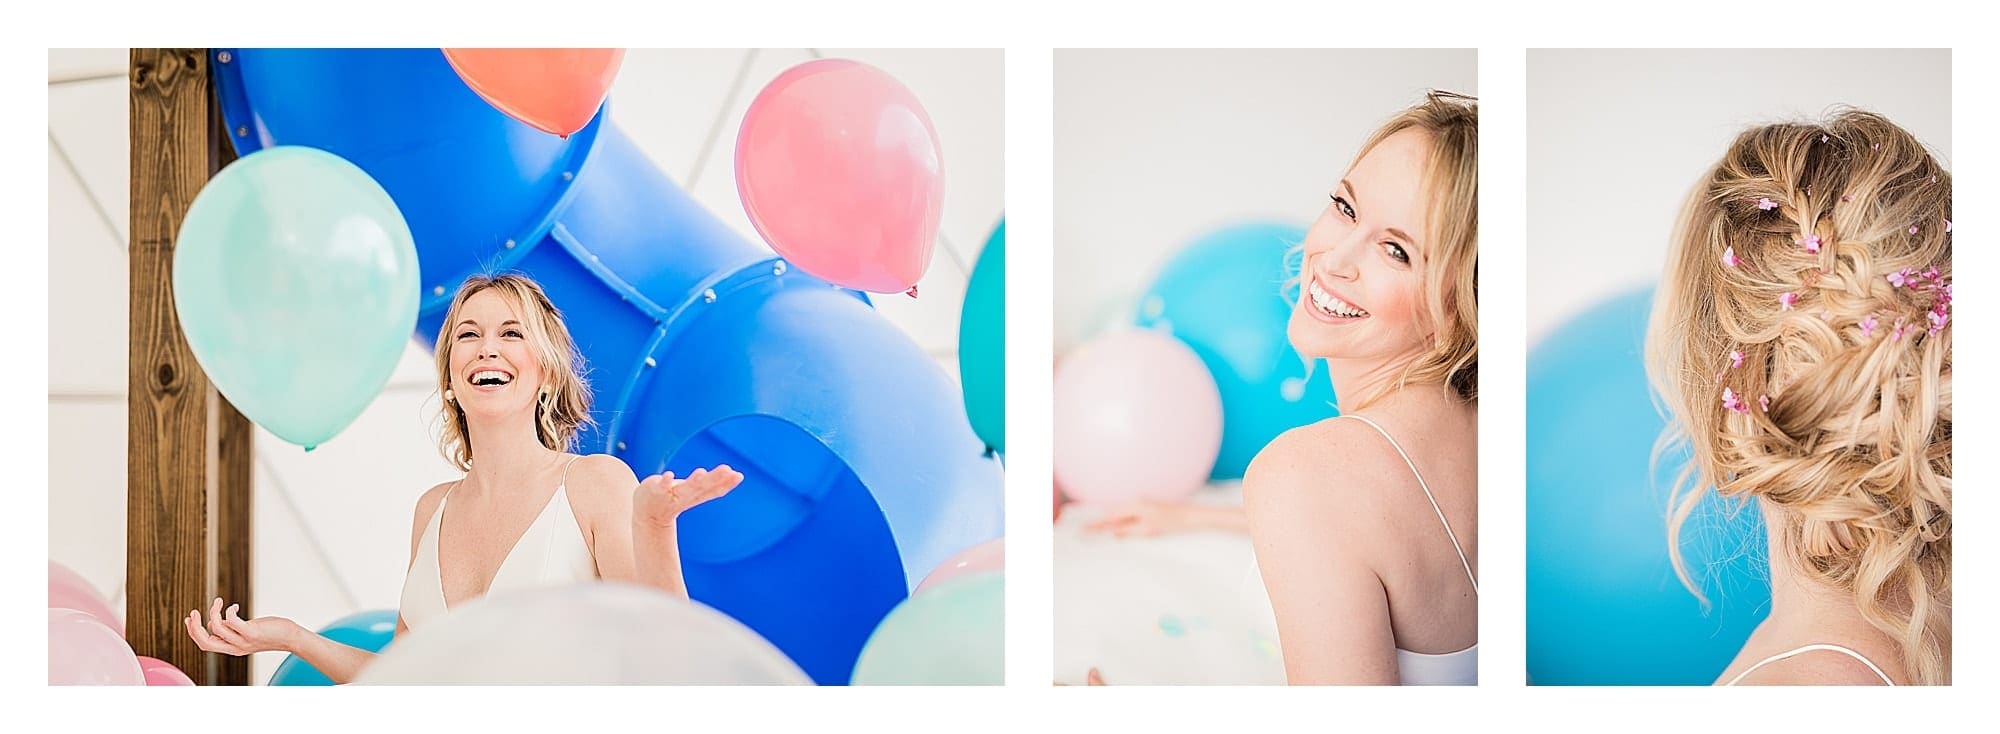 Bride in wedding dress laughing surrounded by many multi colored balloons